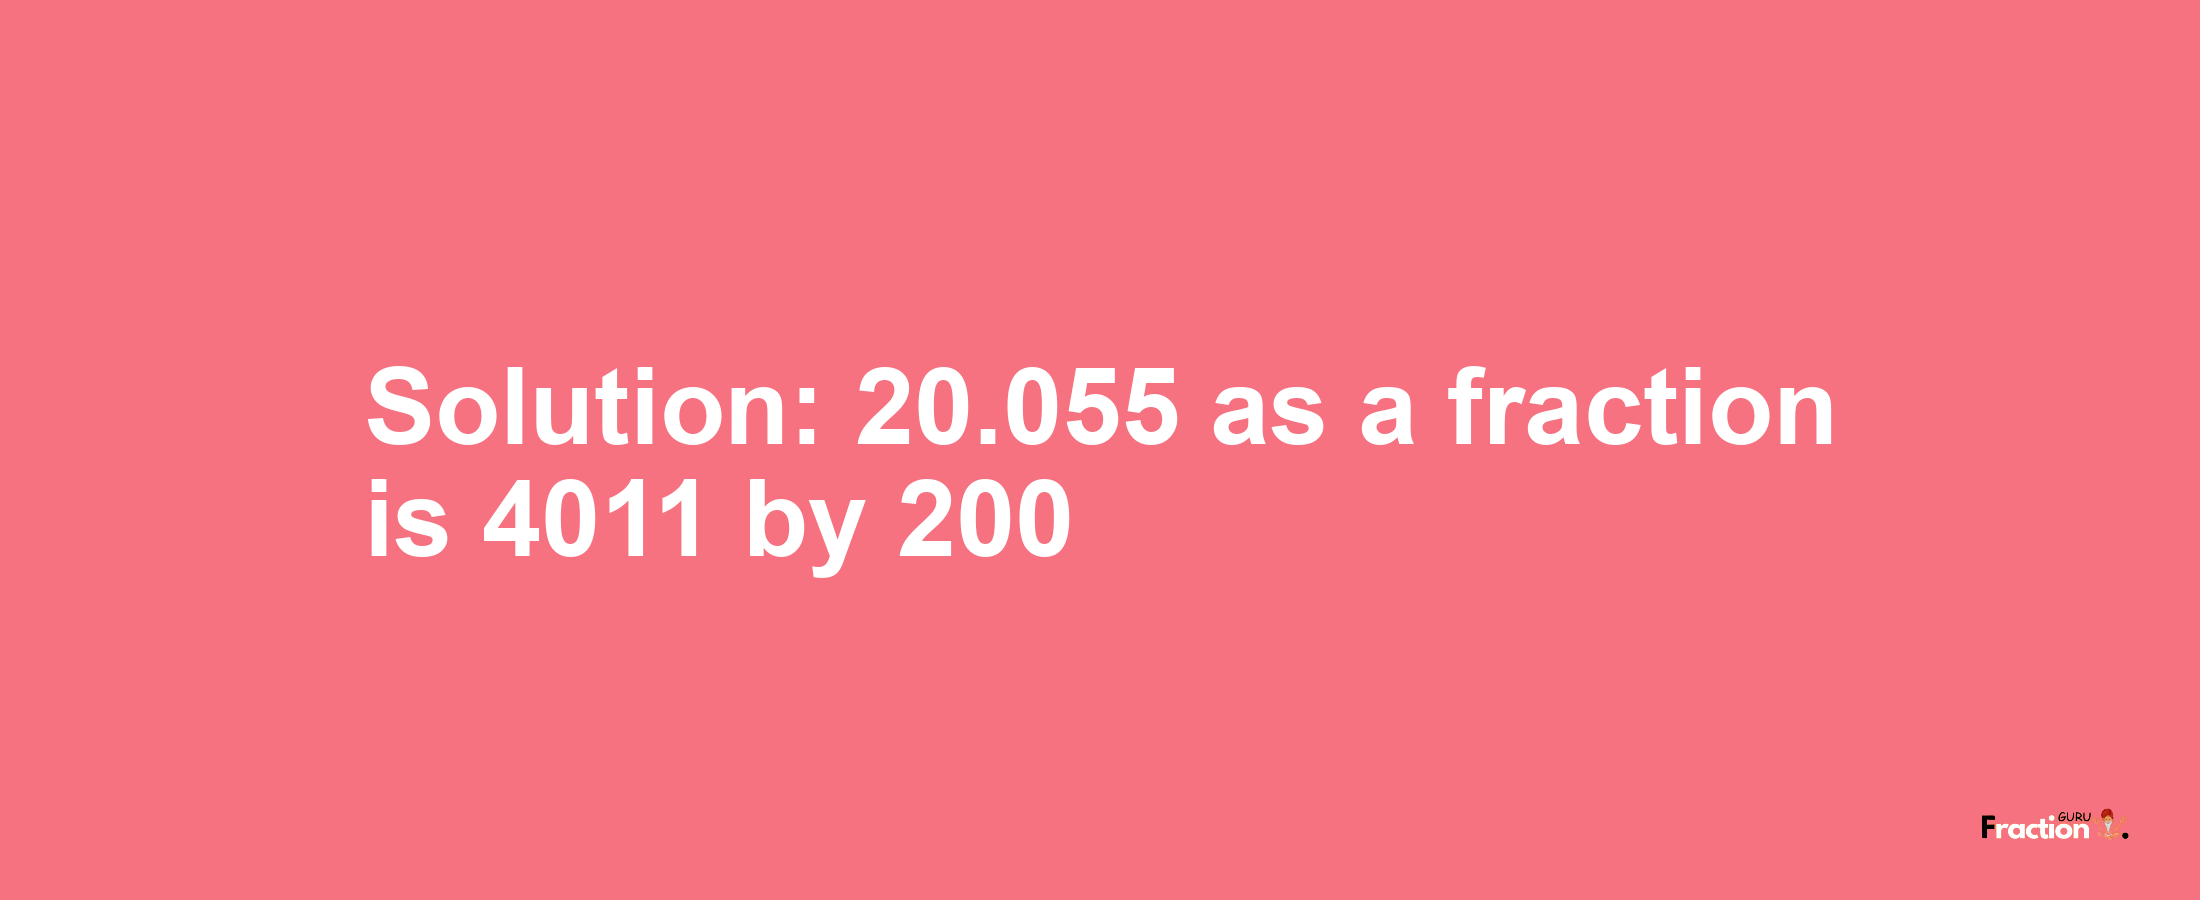 Solution:20.055 as a fraction is 4011/200